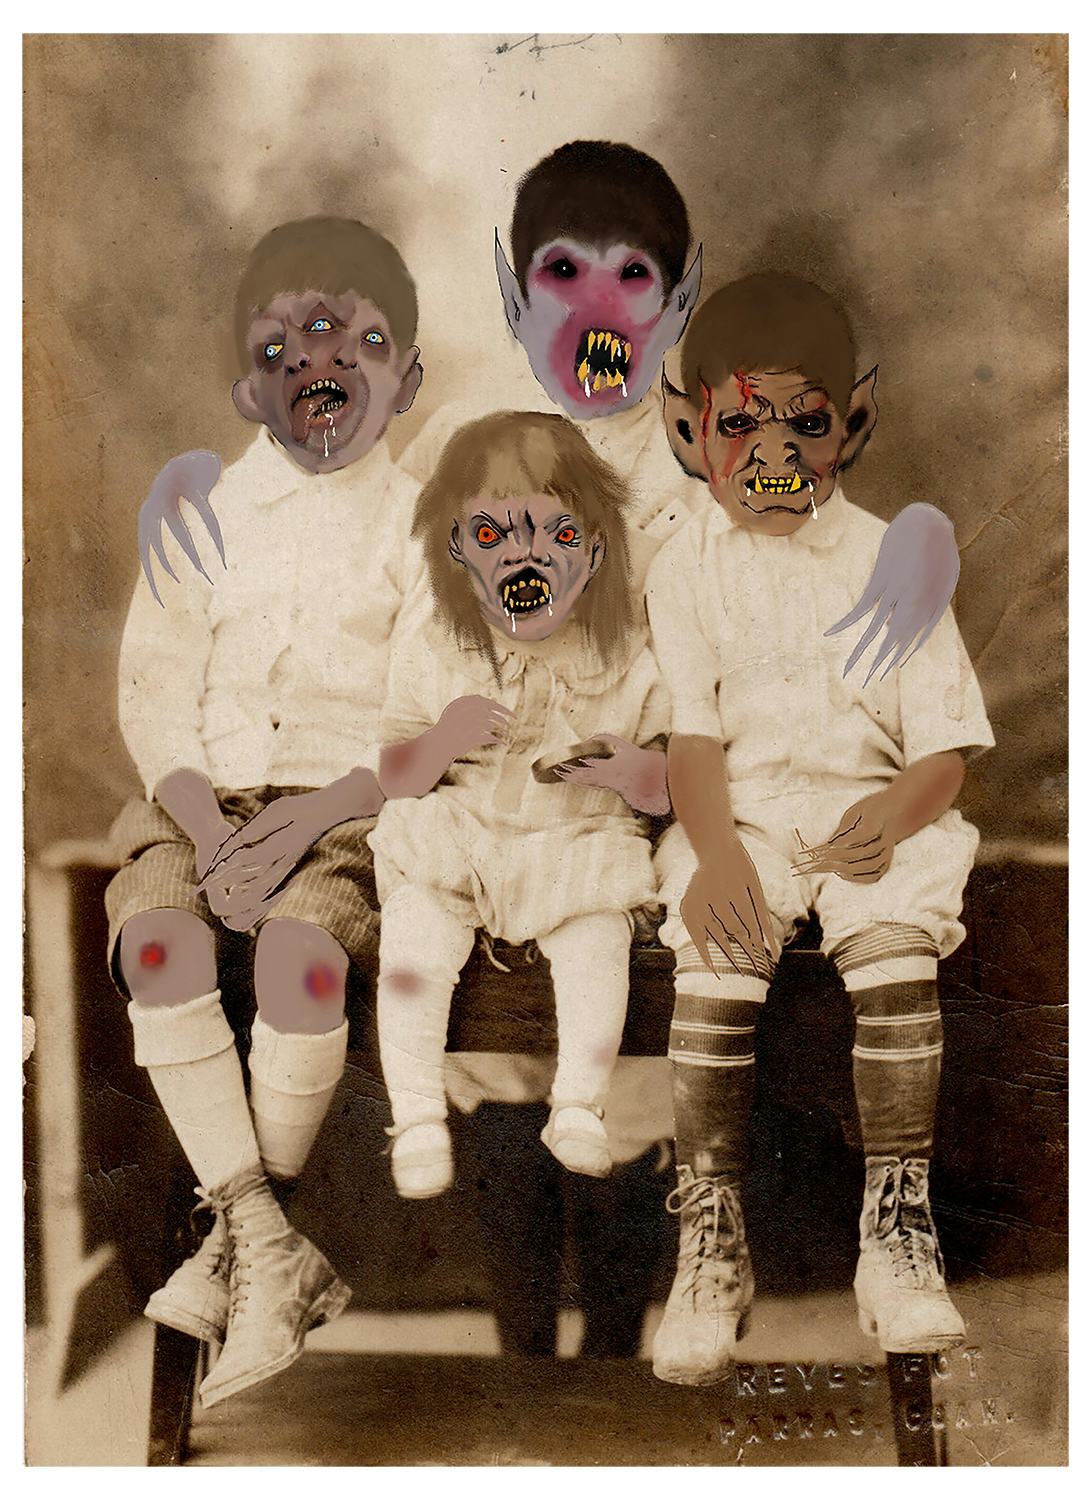 Archival photo, altered with devil-like representations on the heads of kids.